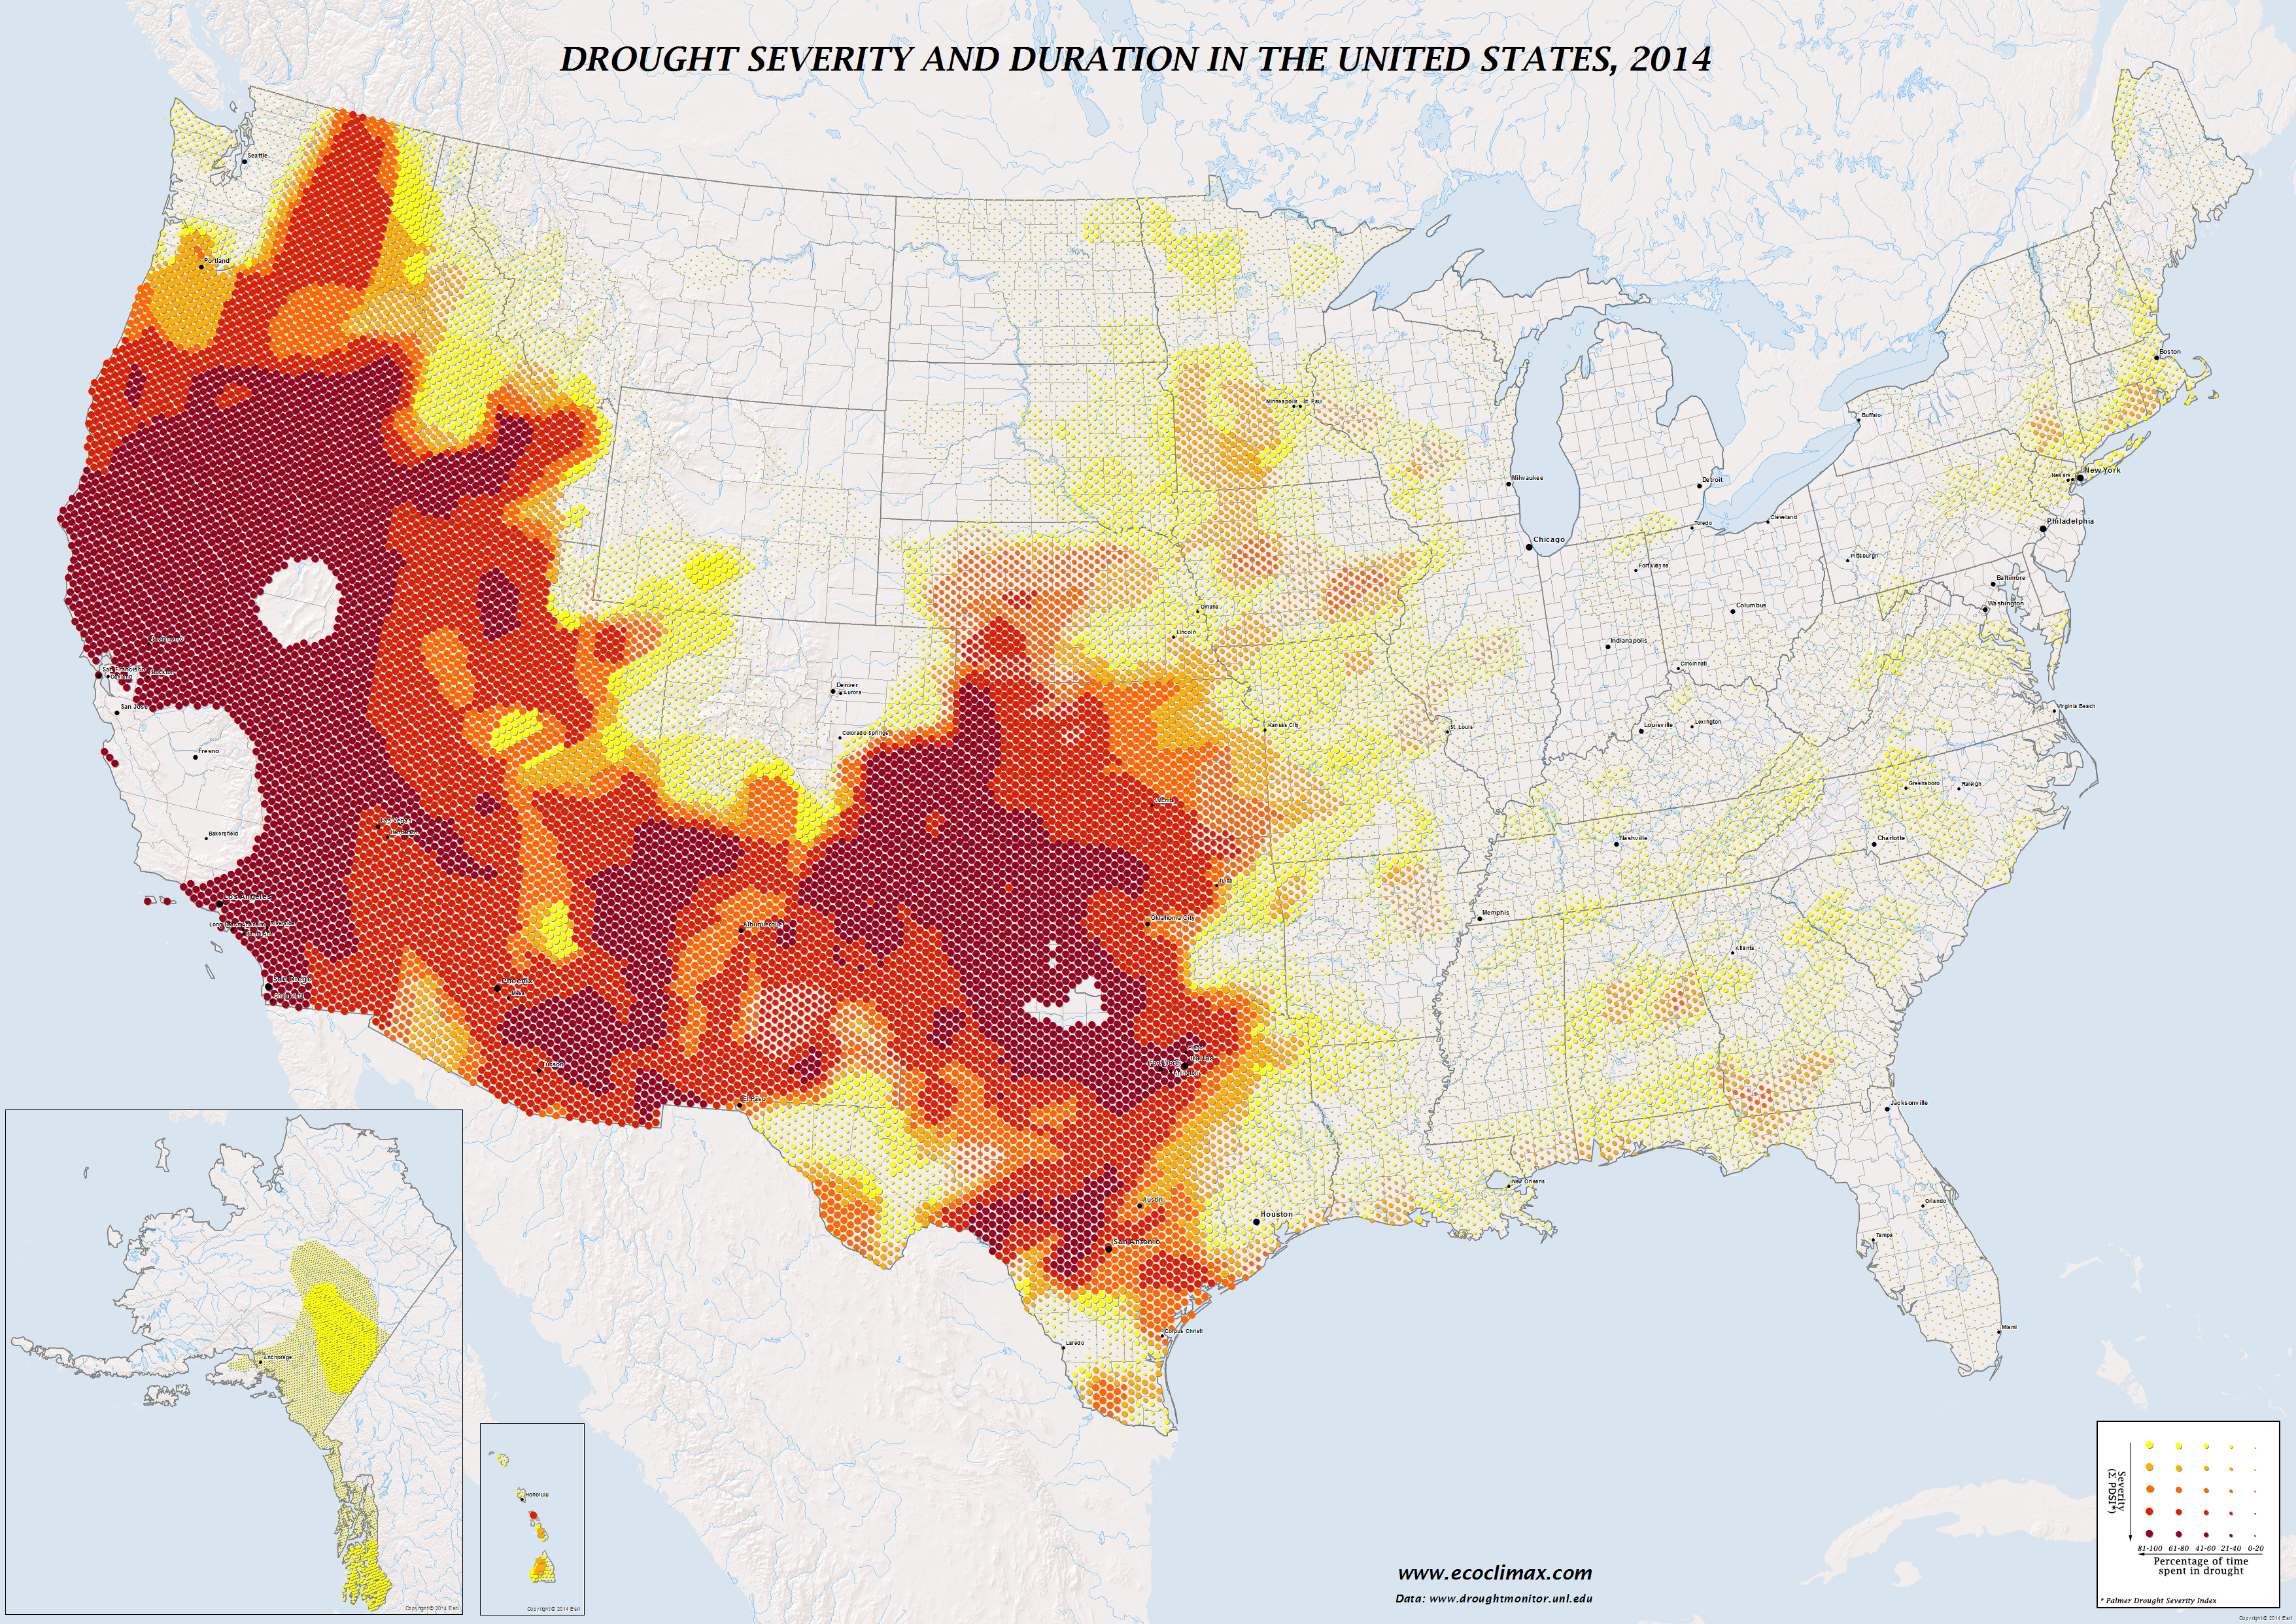 Drought severity & duration in the U.S, 2014